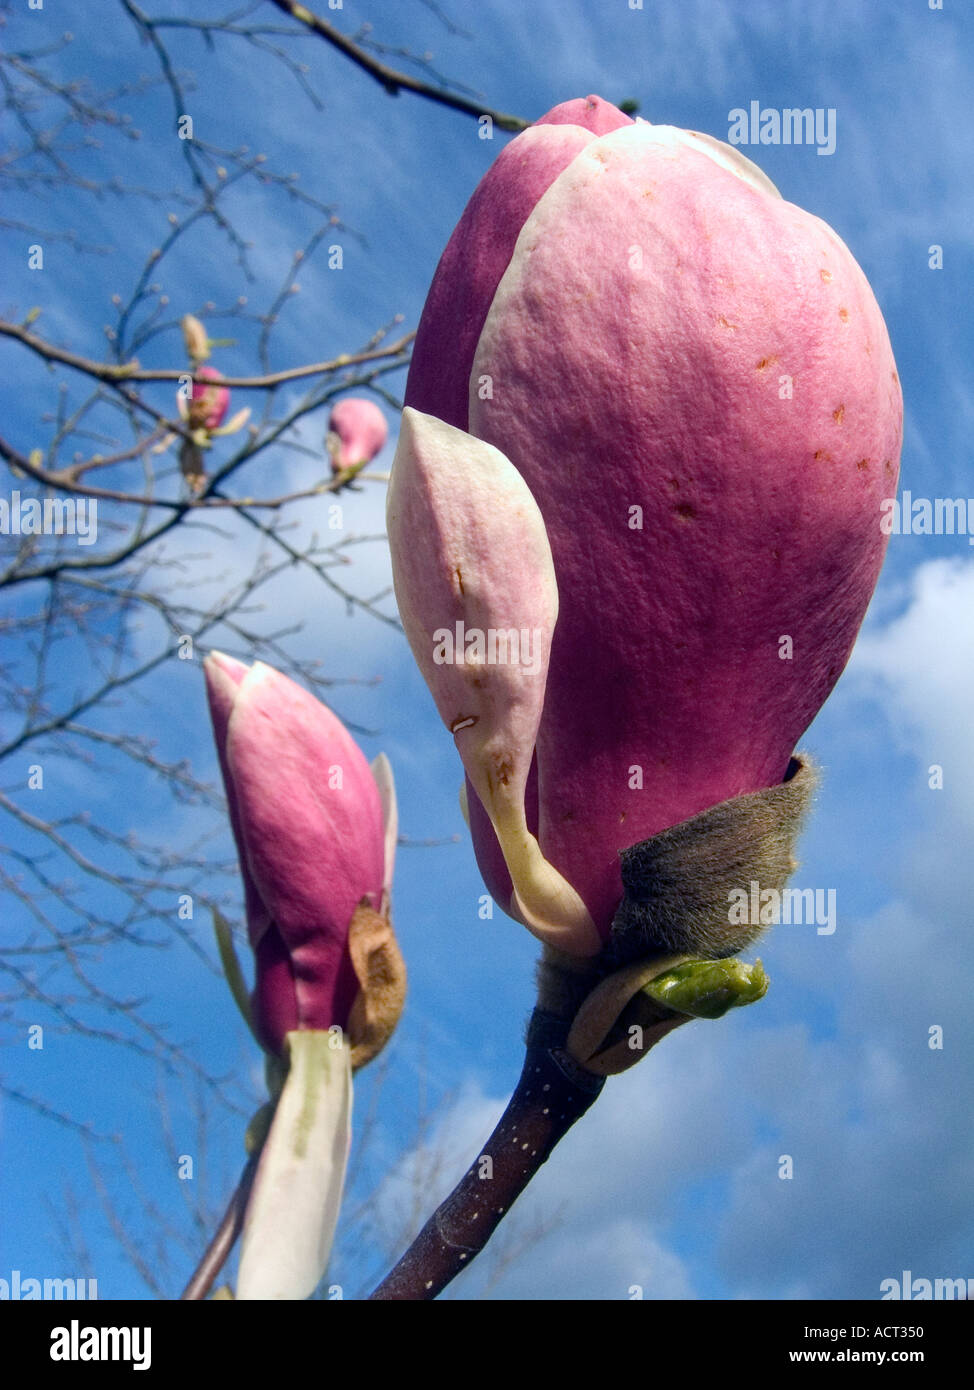 close up of dark pink magnolia bud against a blue sky Stock Photo